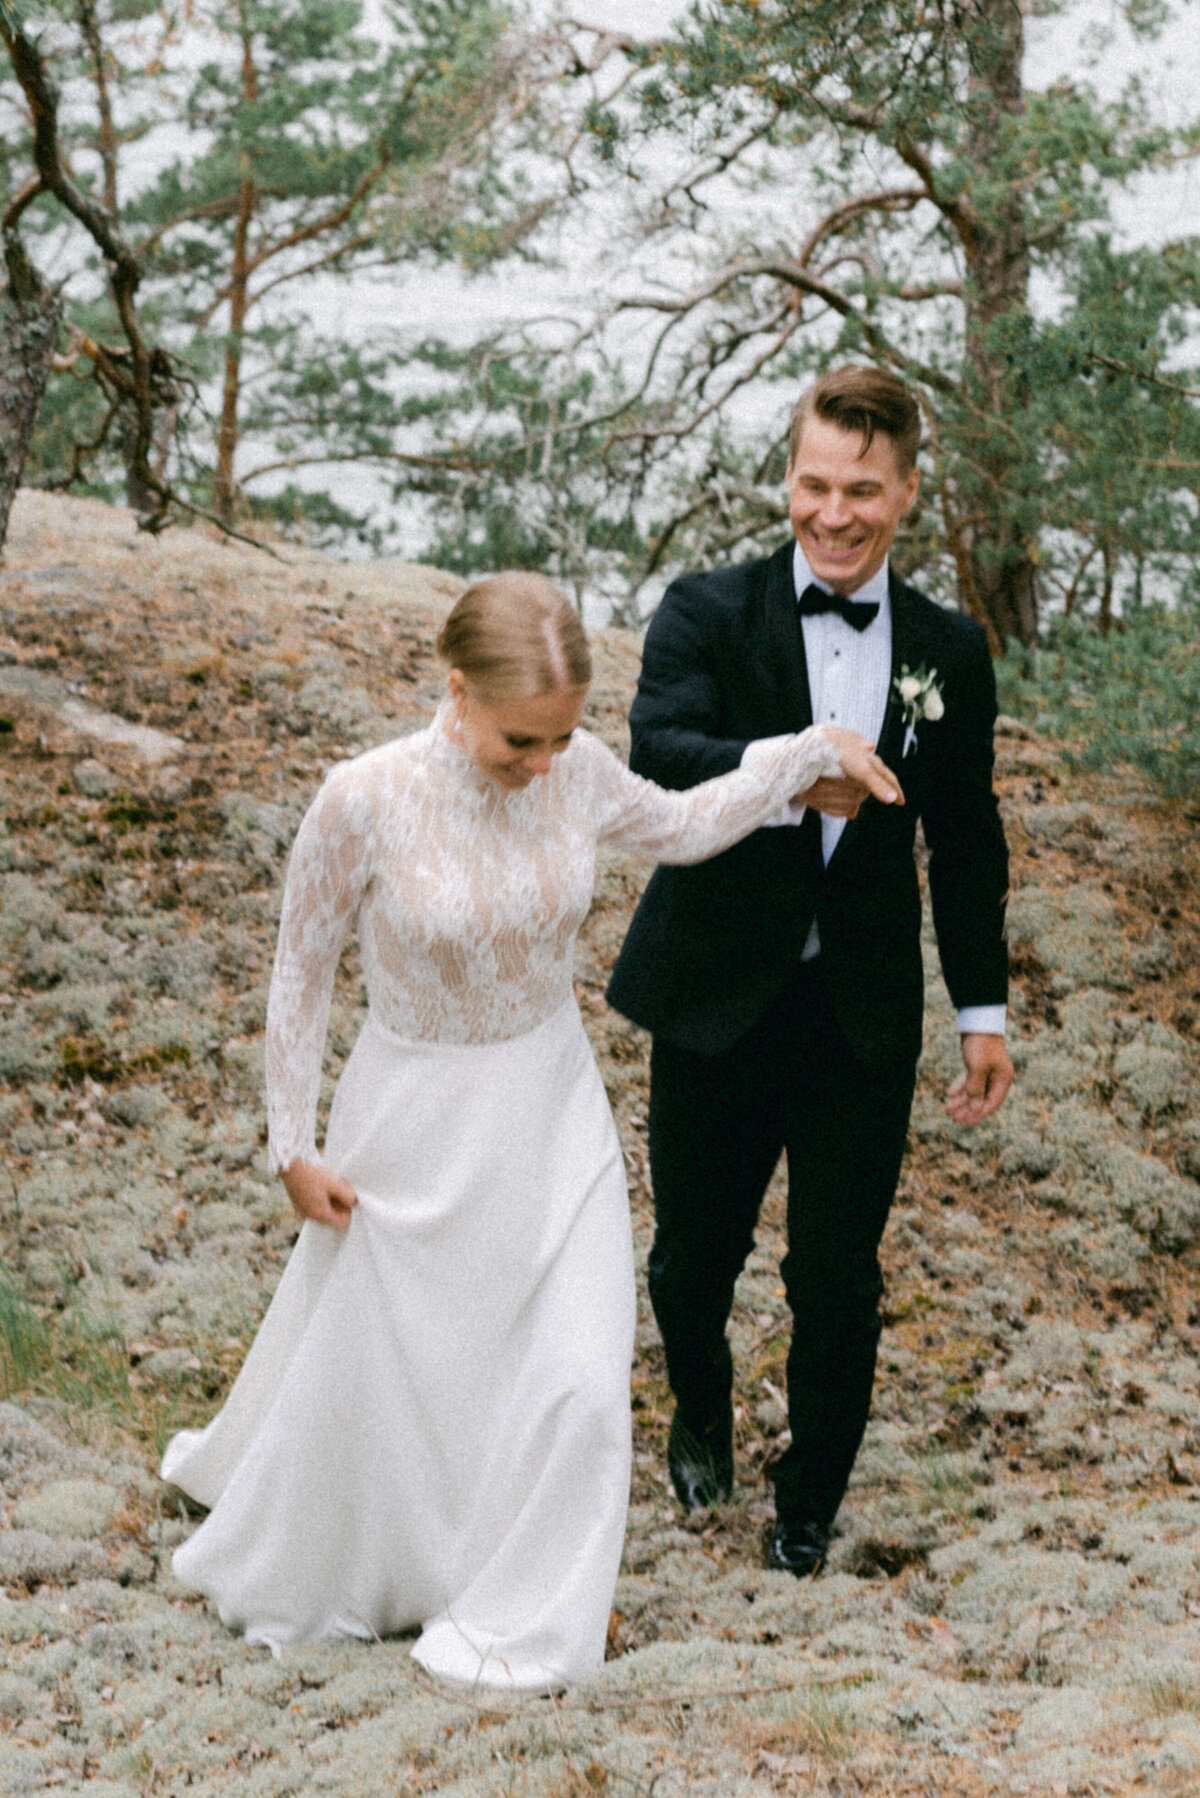 A wedding couple is laughing and walking in the forest in Finland. A wedding photograph by Finnish photographer Hannika Gabrielsson.